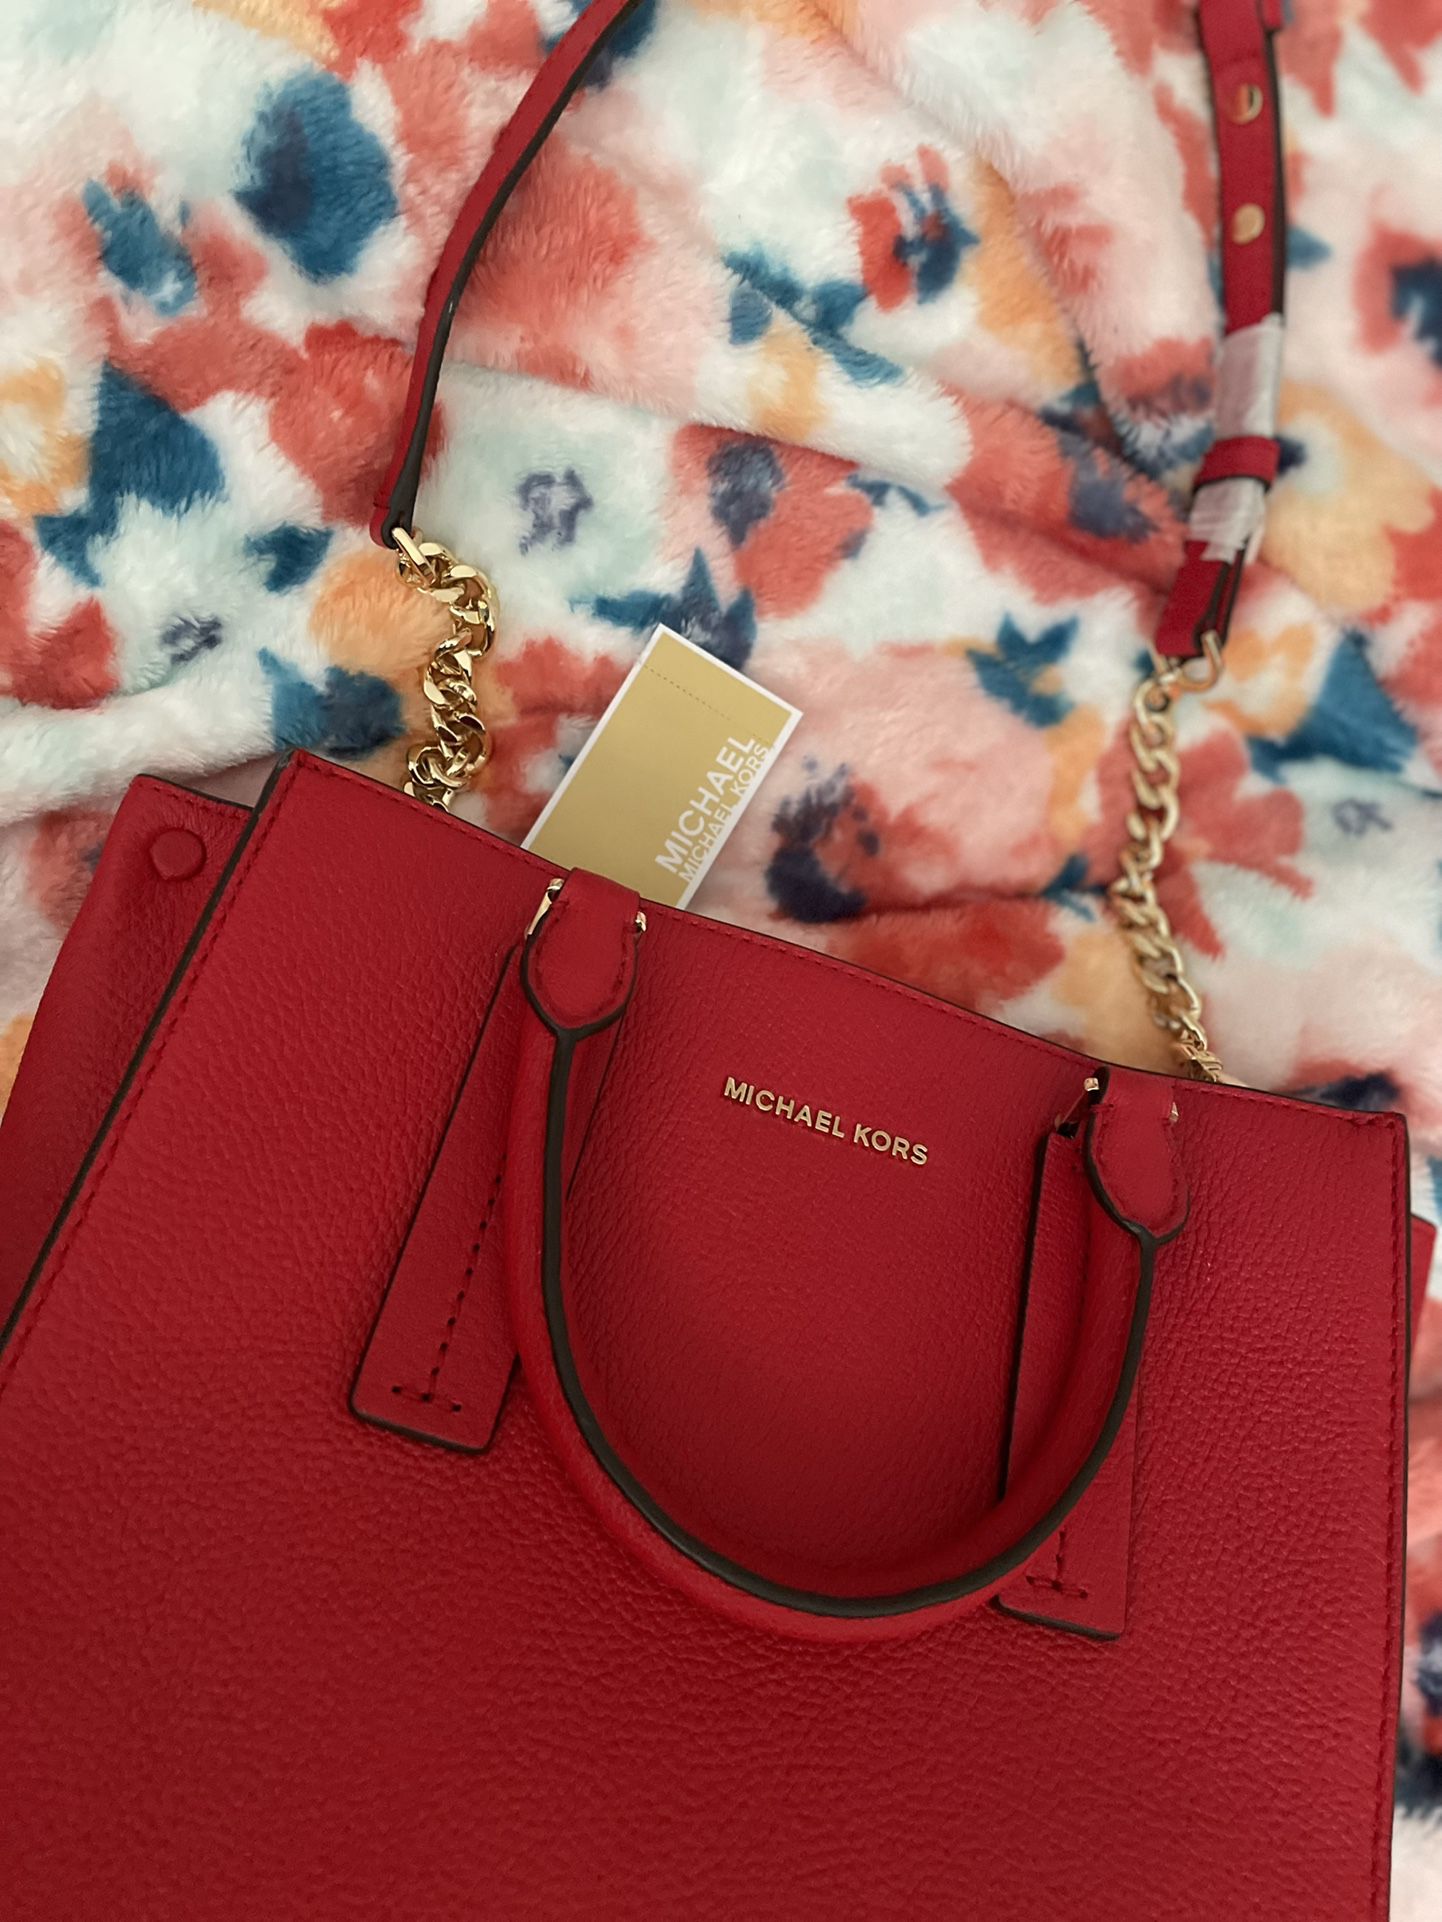 Michael Kors Purse for Sale in Rowland Heights, CA - OfferUp